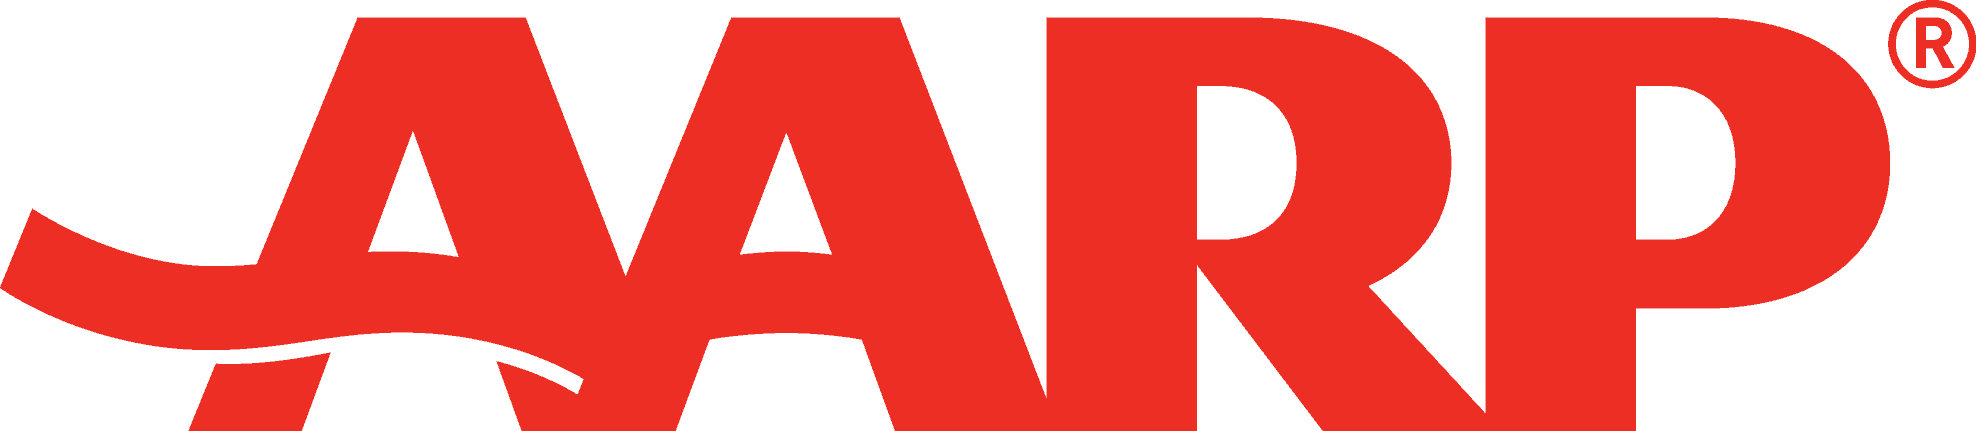 AARP Logo used on drcarlamanly.com to reference articles citing Dr Carla Manly like https://www.aarp.org/disrupt-aging/stories/info-2020/coronavirus-role-reversal.html